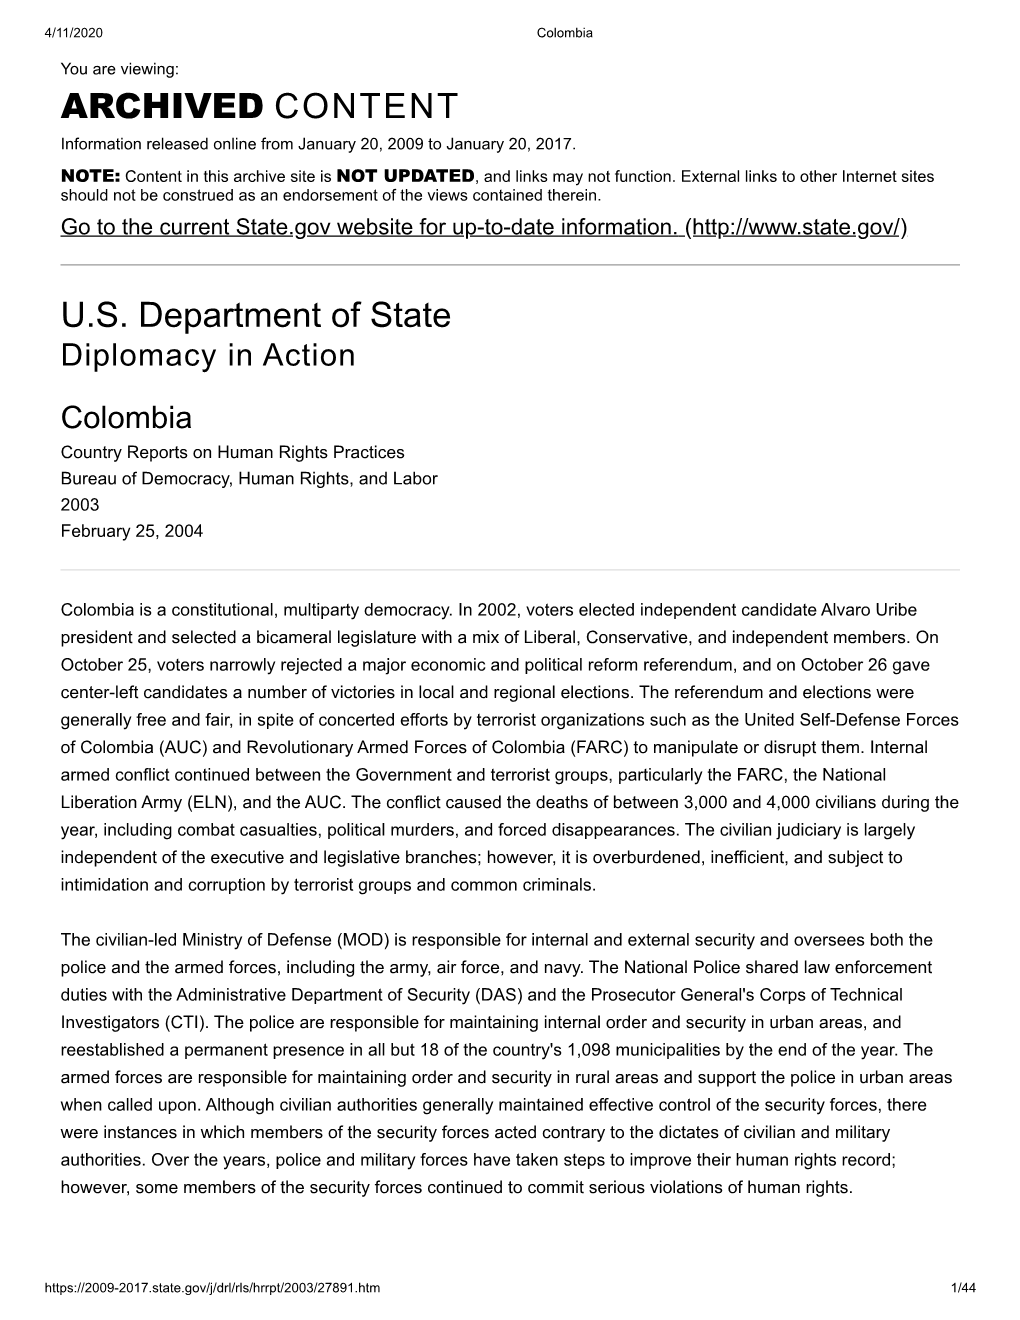 US Department of State ARCHIVED CONTENT